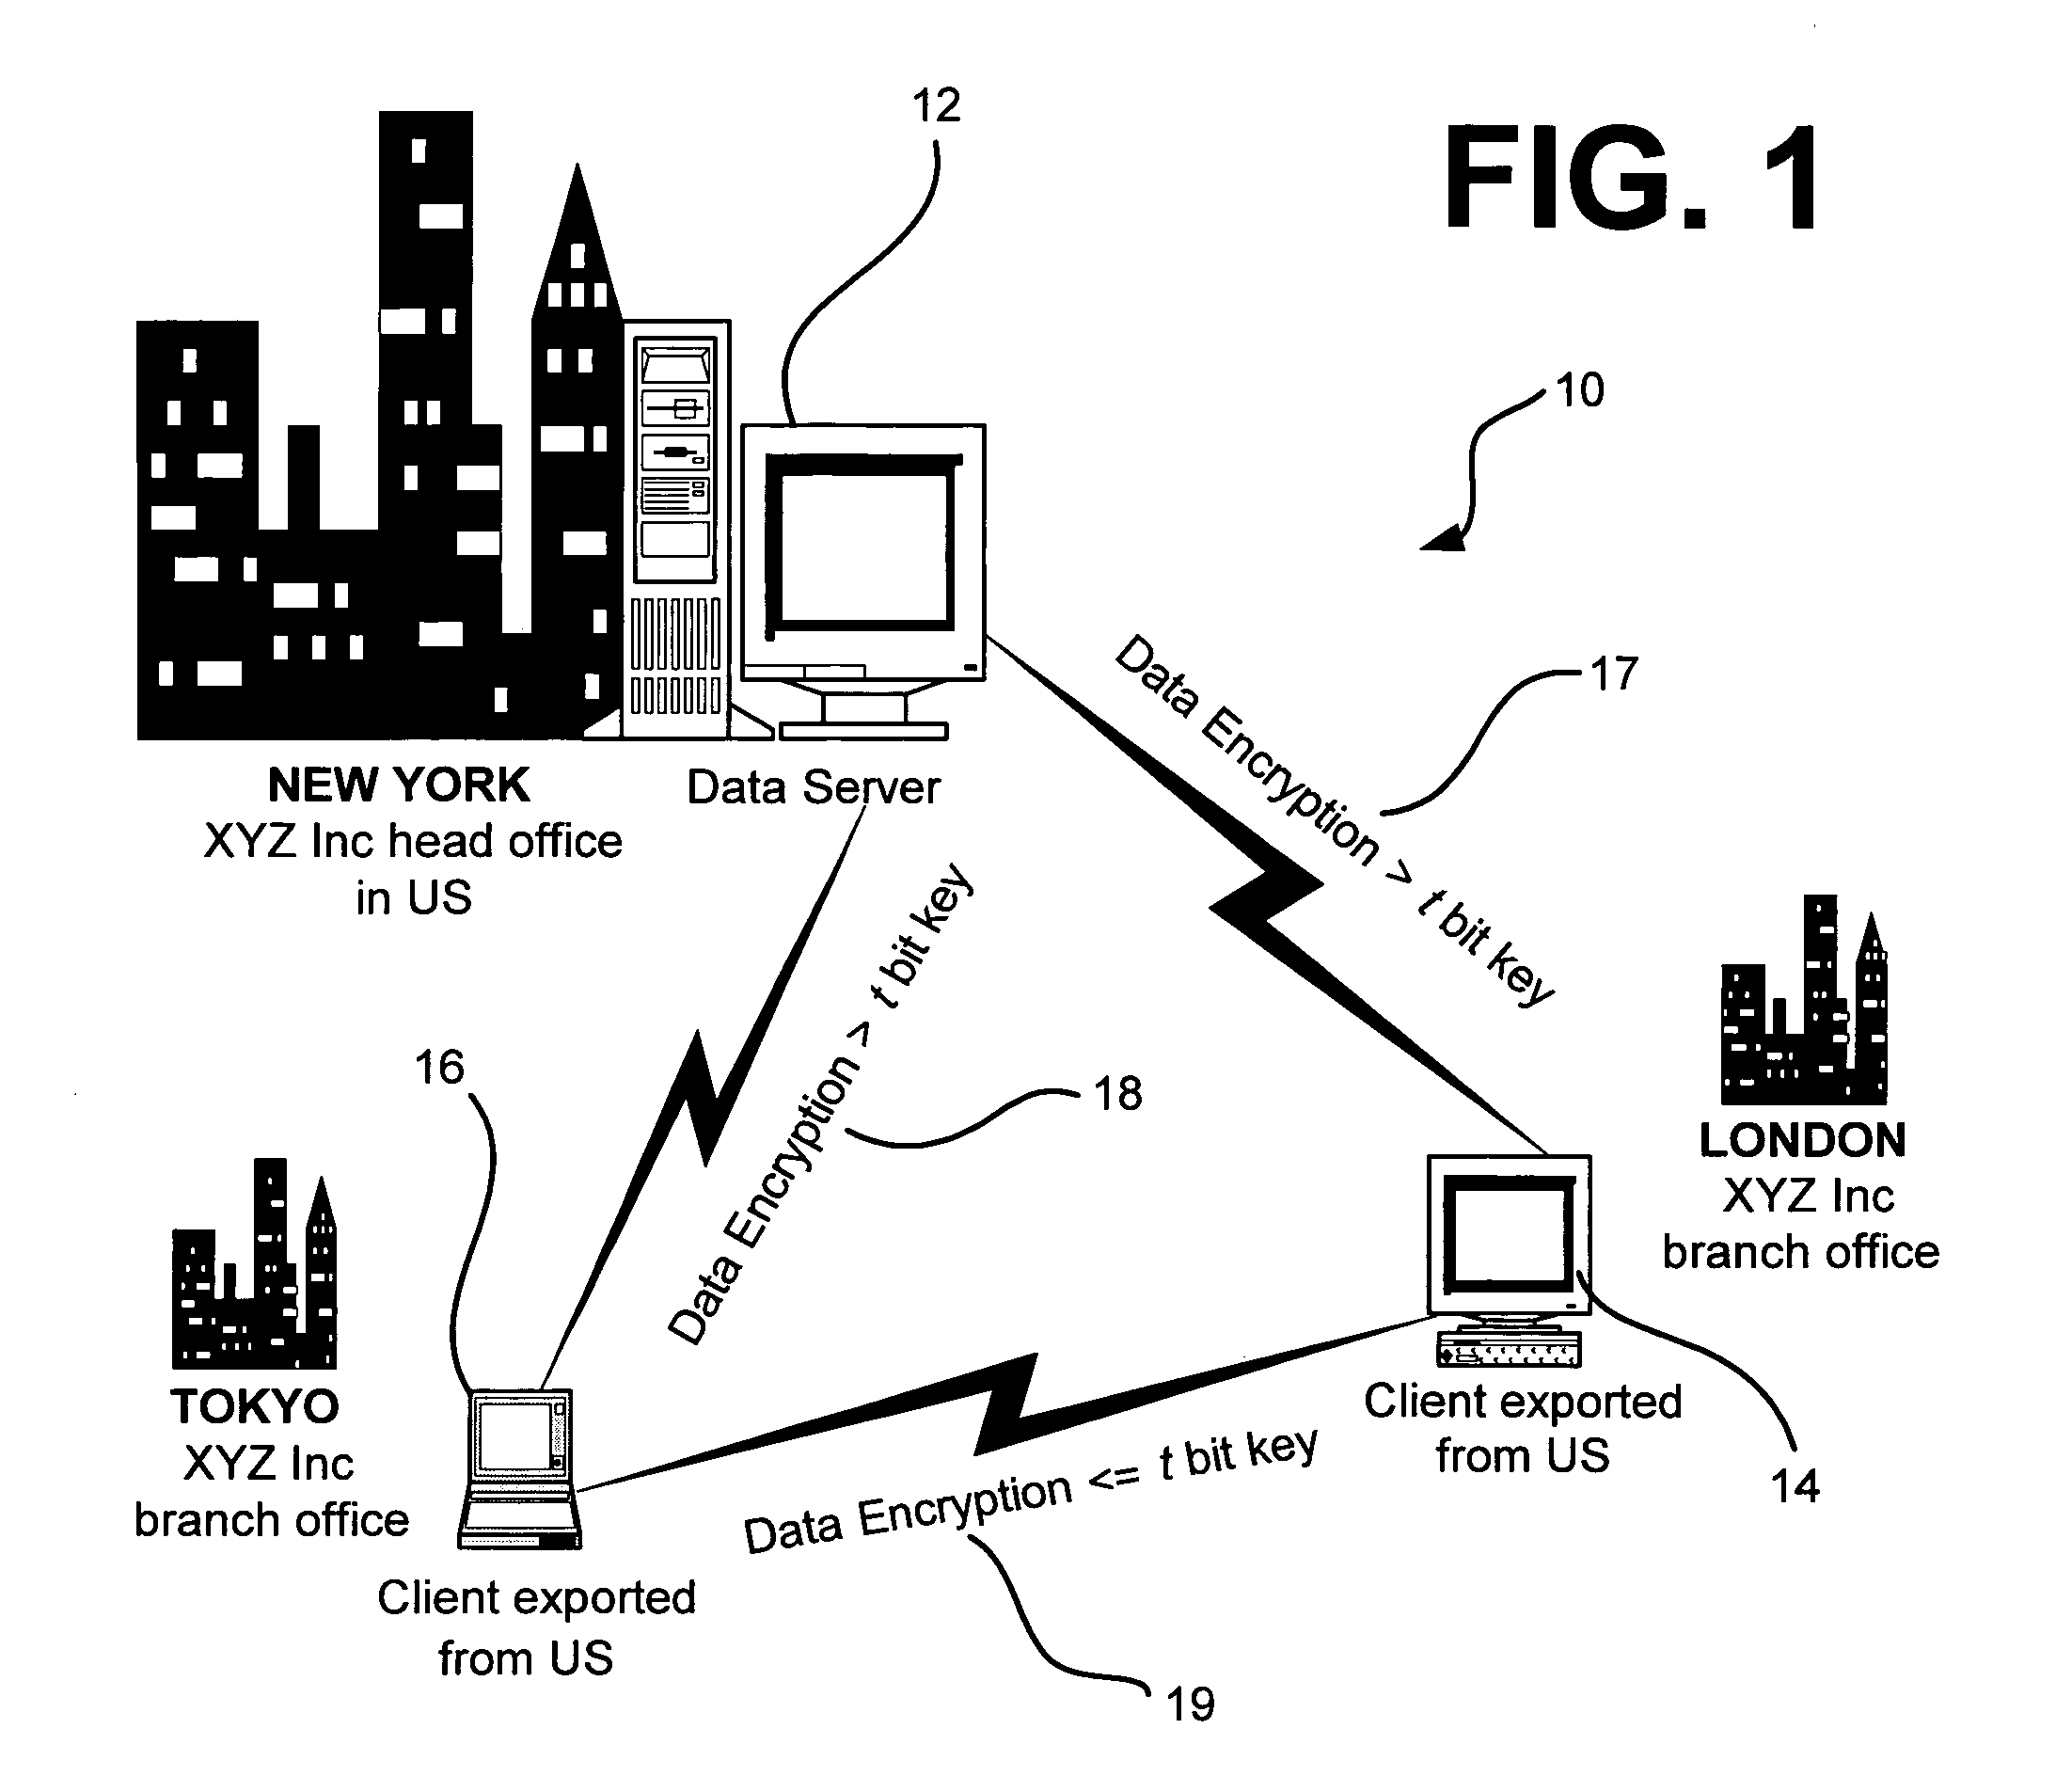 Method and system for network security capable of doing stronger encryption with authorized devices